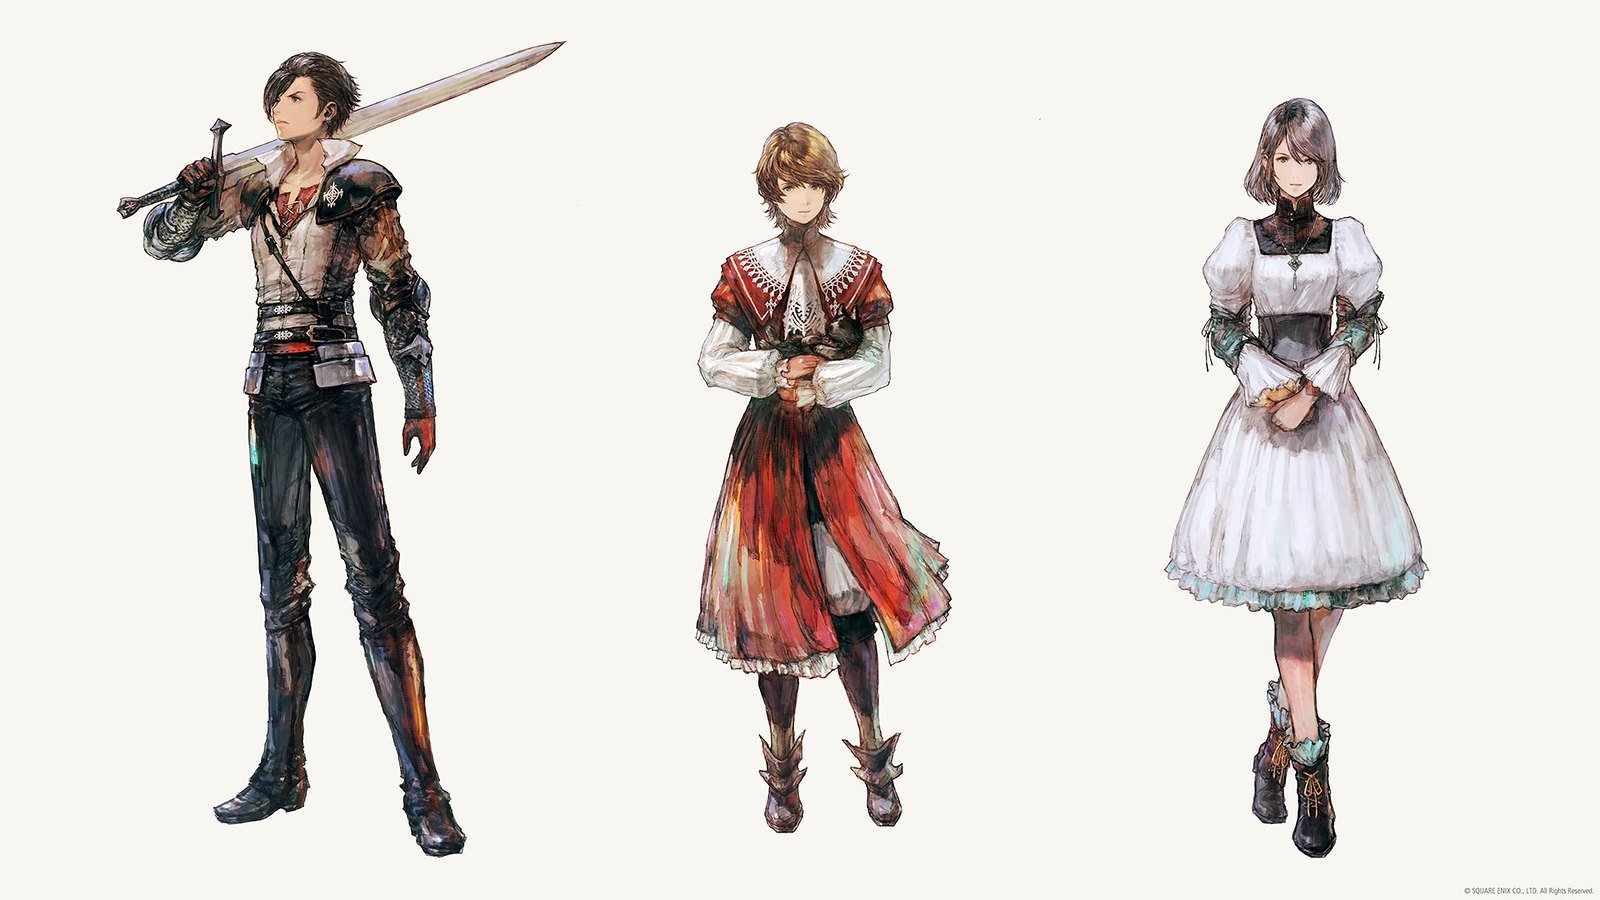 Three Protagonists Of Final Fantasy Xvi - Clive And Joshua Rosfield, And Their Adopted Sister Jill Warrick.